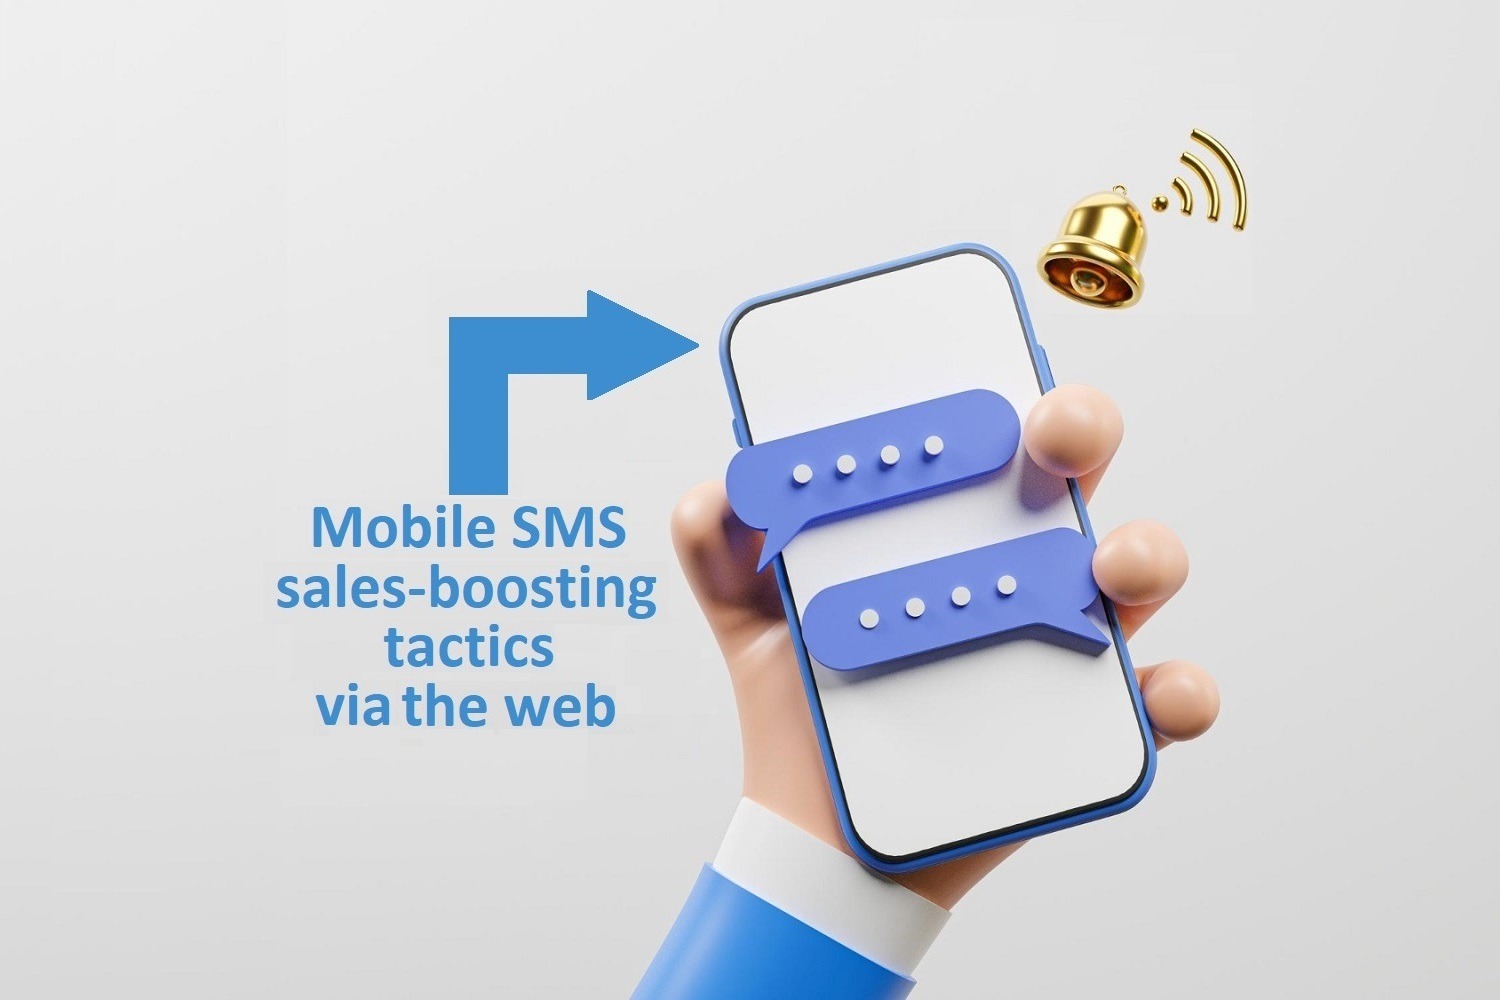 About using mobile SMS text messaging tactics via the web to boost sales.